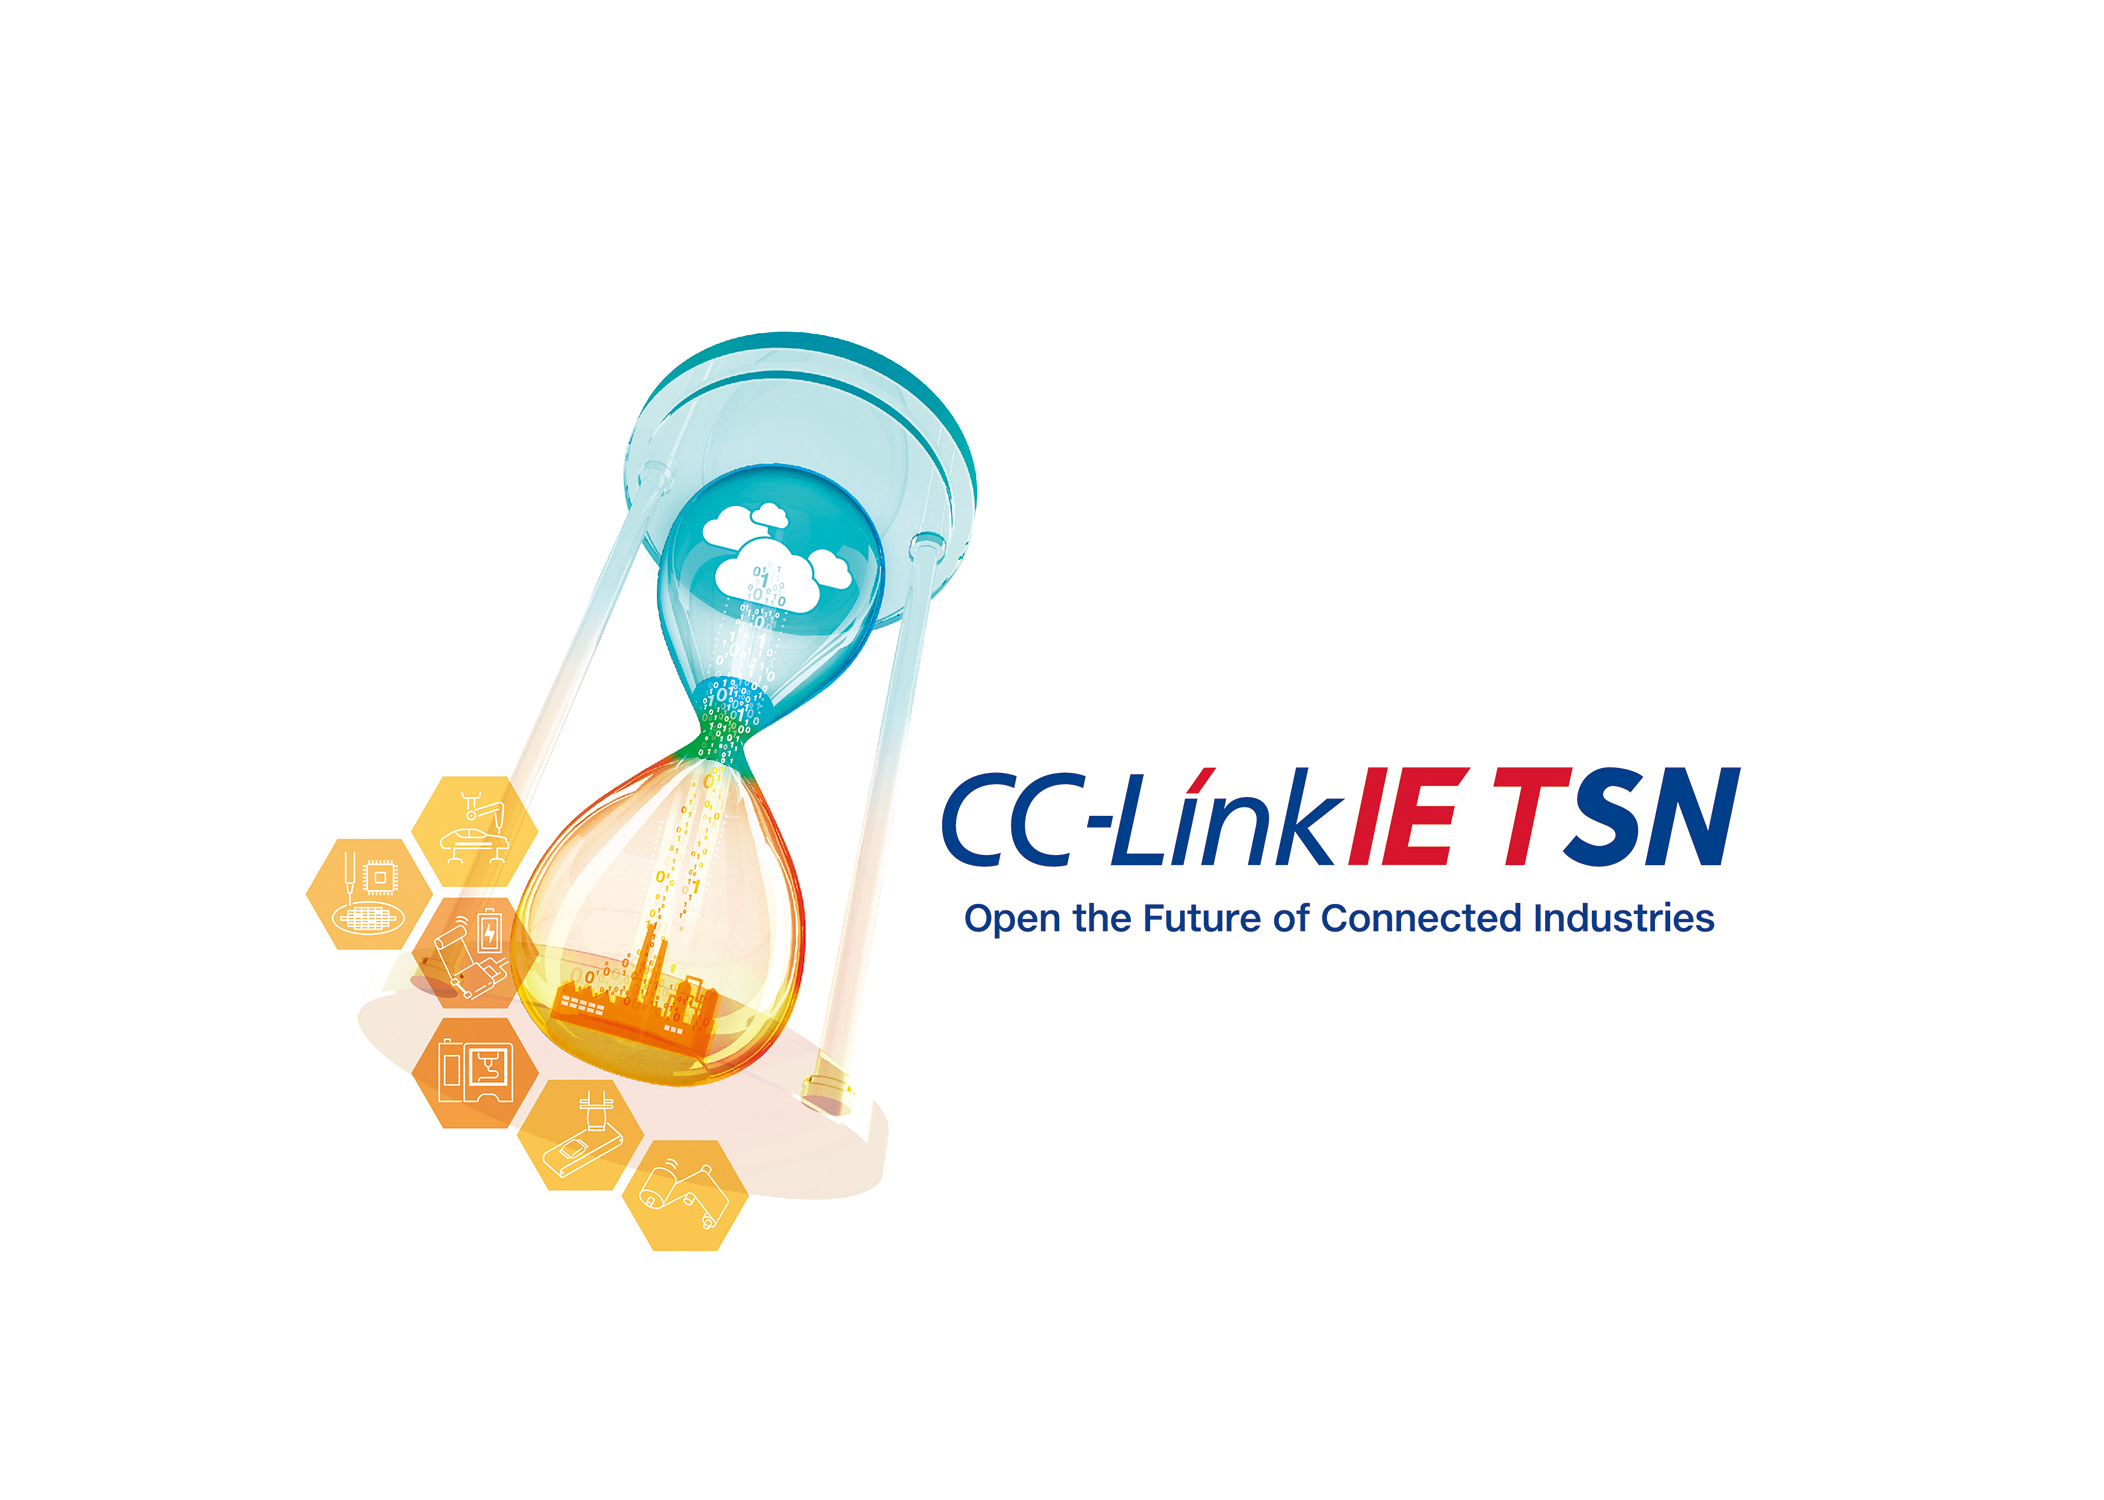 CC-Link IE TSN supports determinism and network convergence – two essential elements of highly competitive, connected industries of the future.